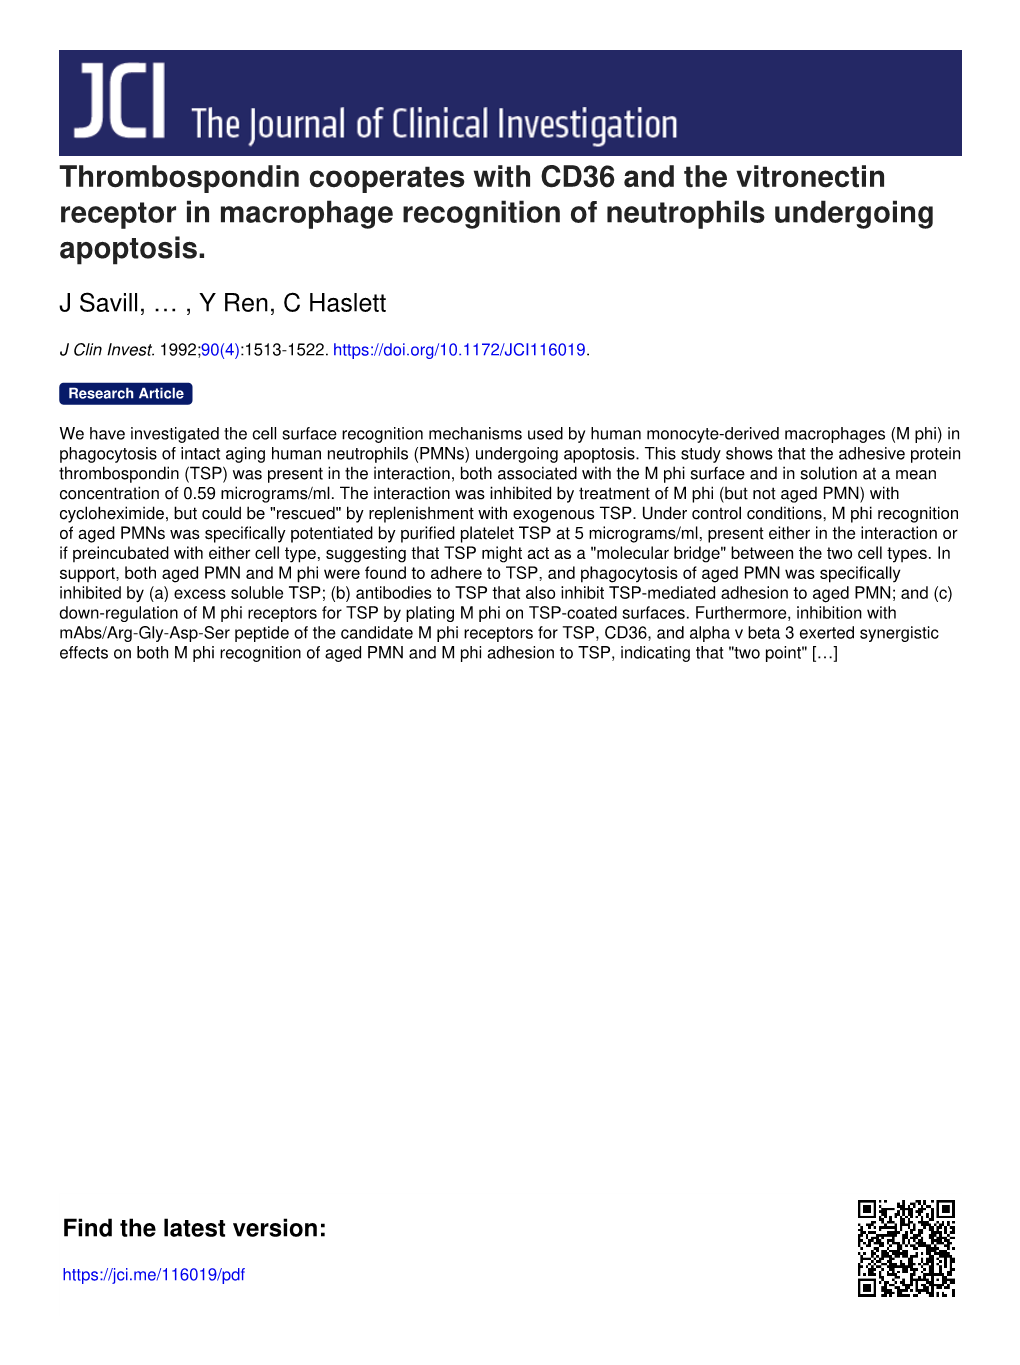 Thrombospondin Cooperates with CD36 and the Vitronectin Receptor in Macrophage Recognition of Neutrophils Undergoing Apoptosis